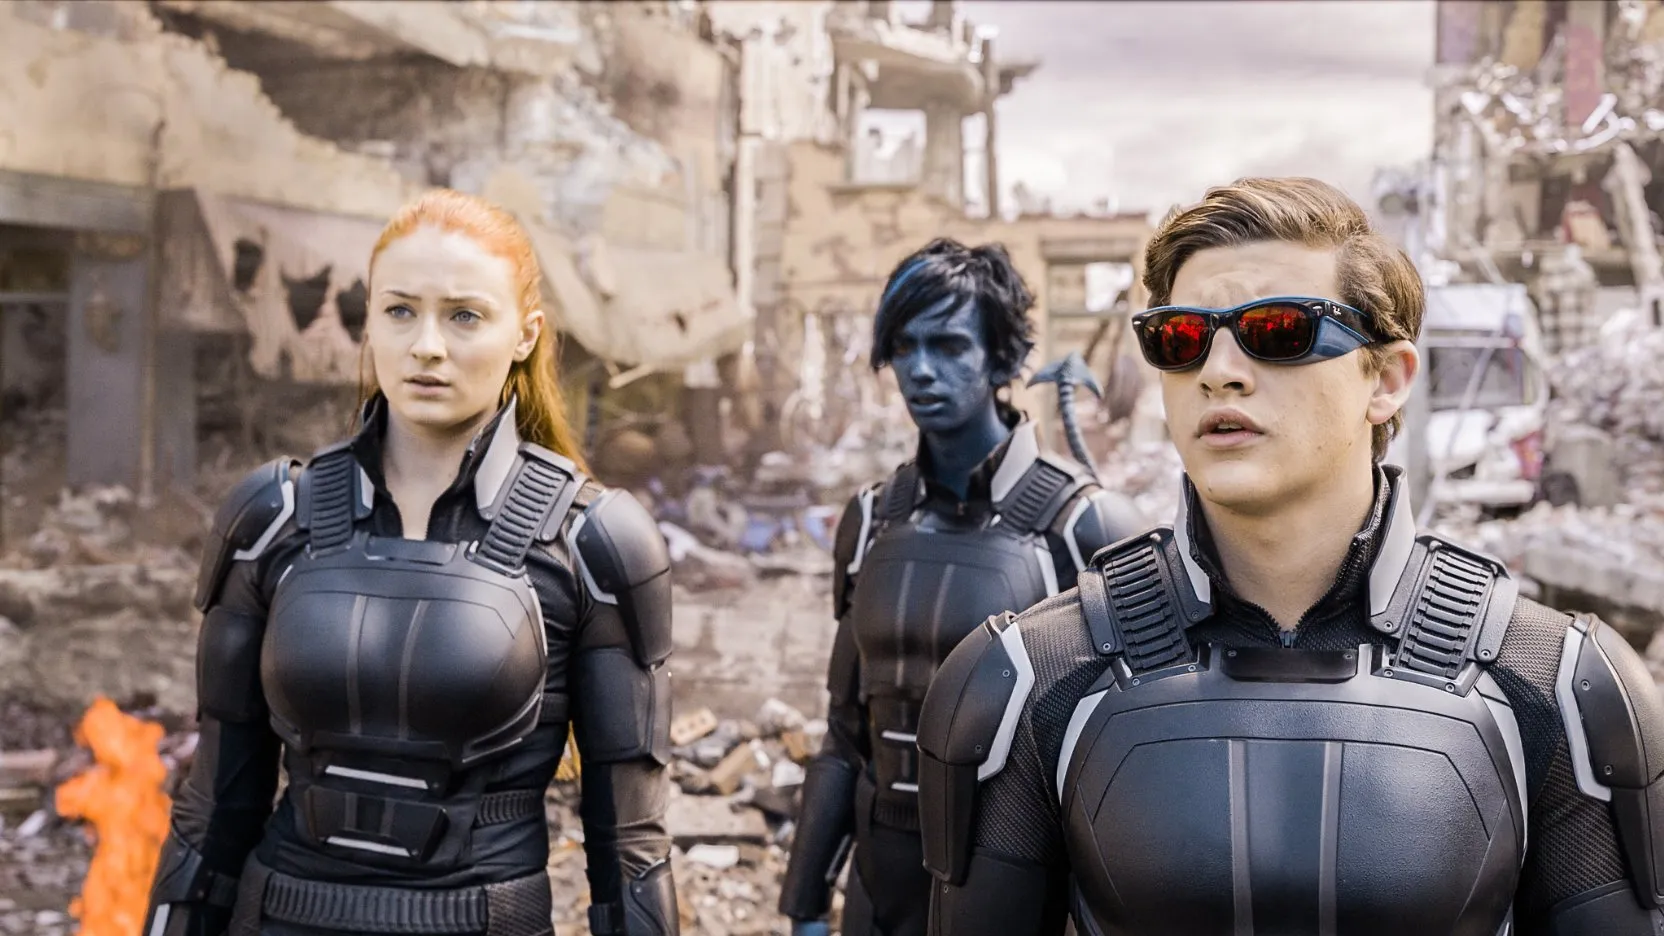 Marvel's New X-Men Movie will Feature a Trans Character, Will Have Both Comedy and Drama [EXCLUSIVE]